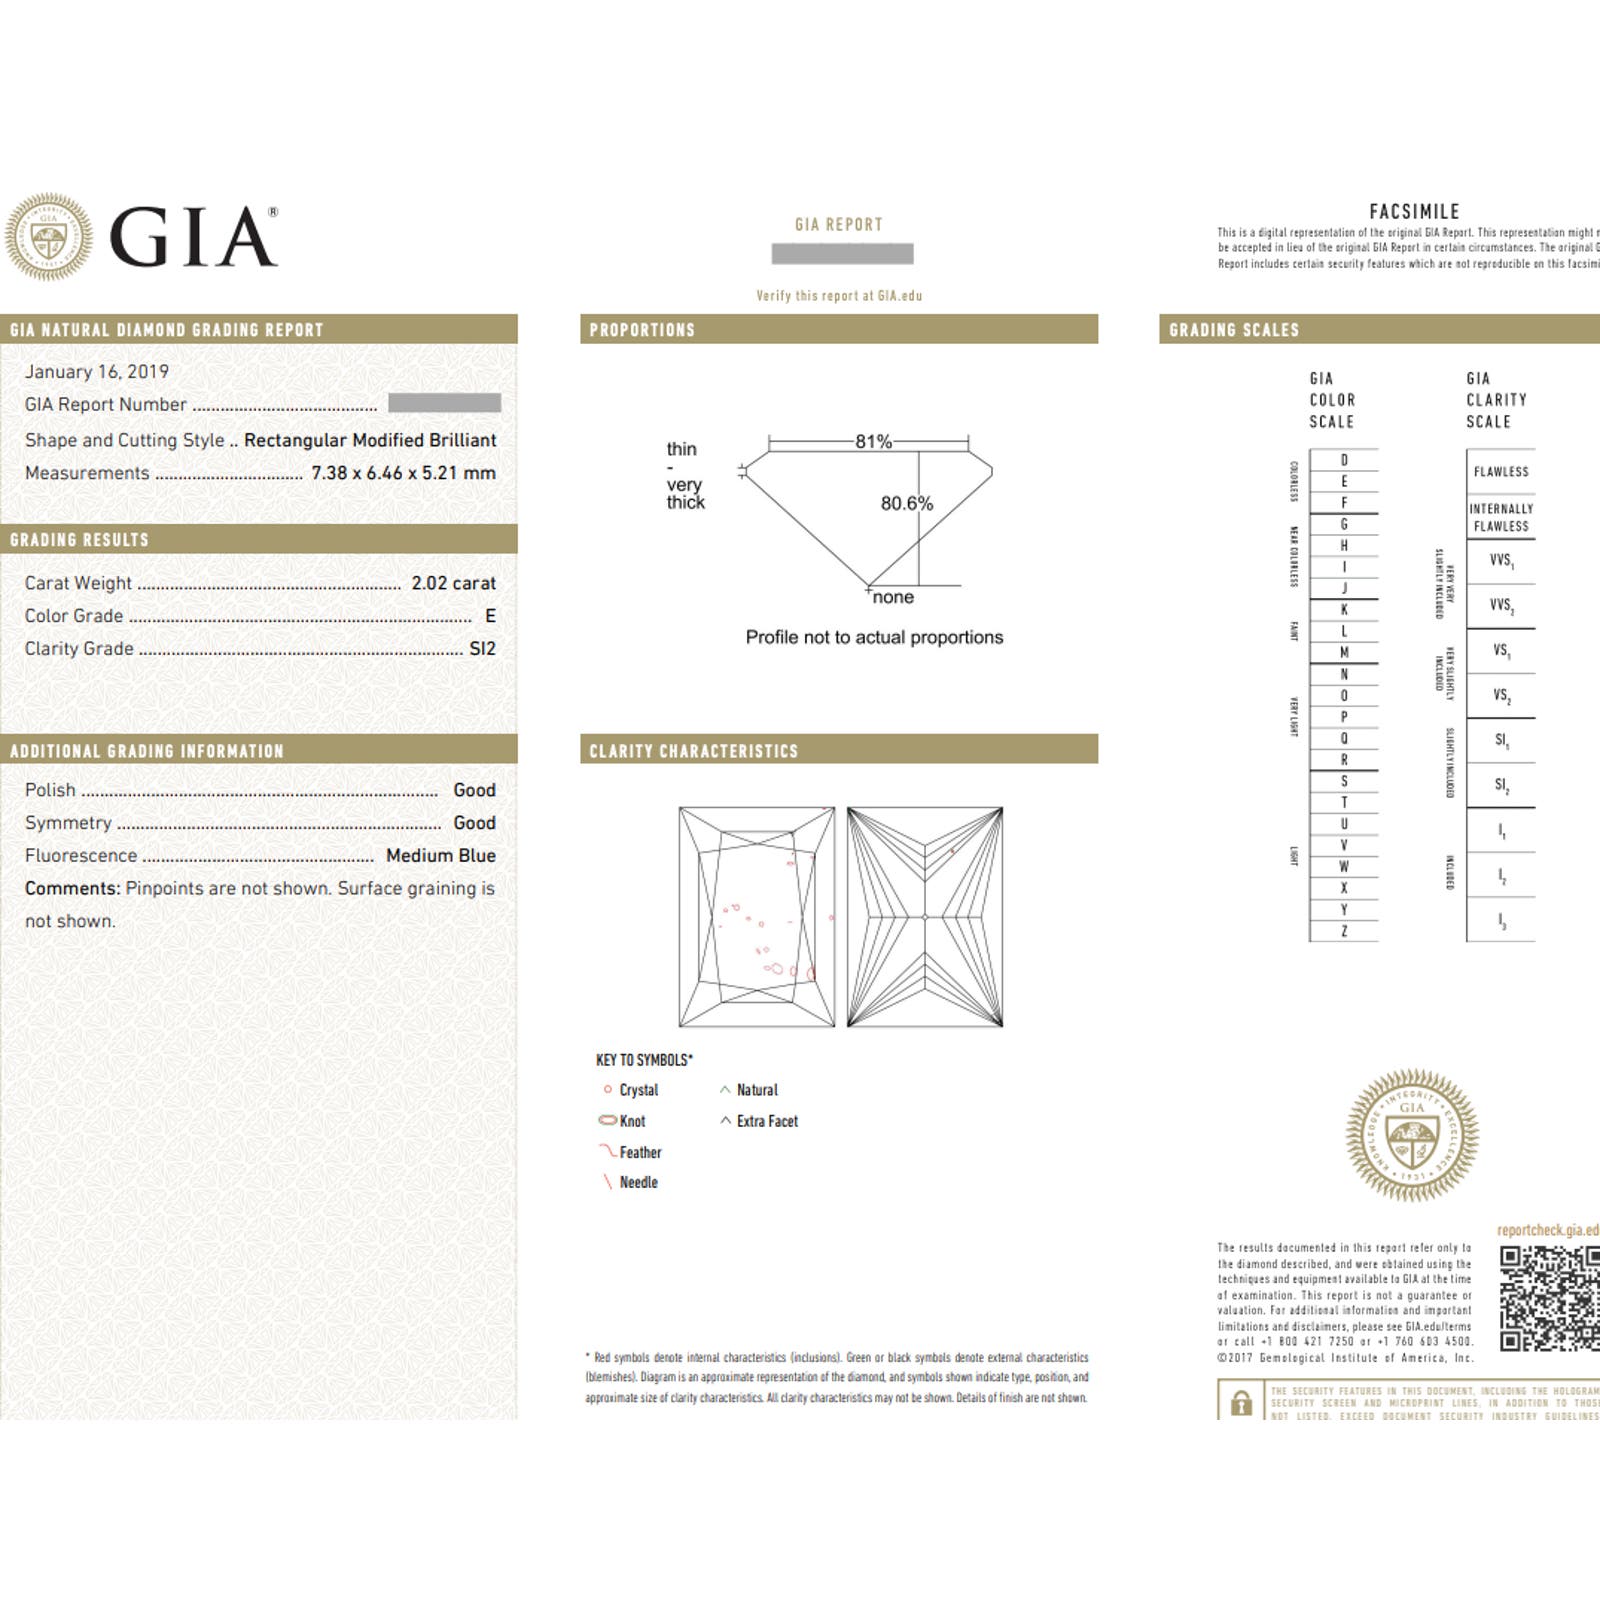 GIA 2.02 ct E color Radiant Diamond with Baguettes Ring in Platinum - HM2061RA